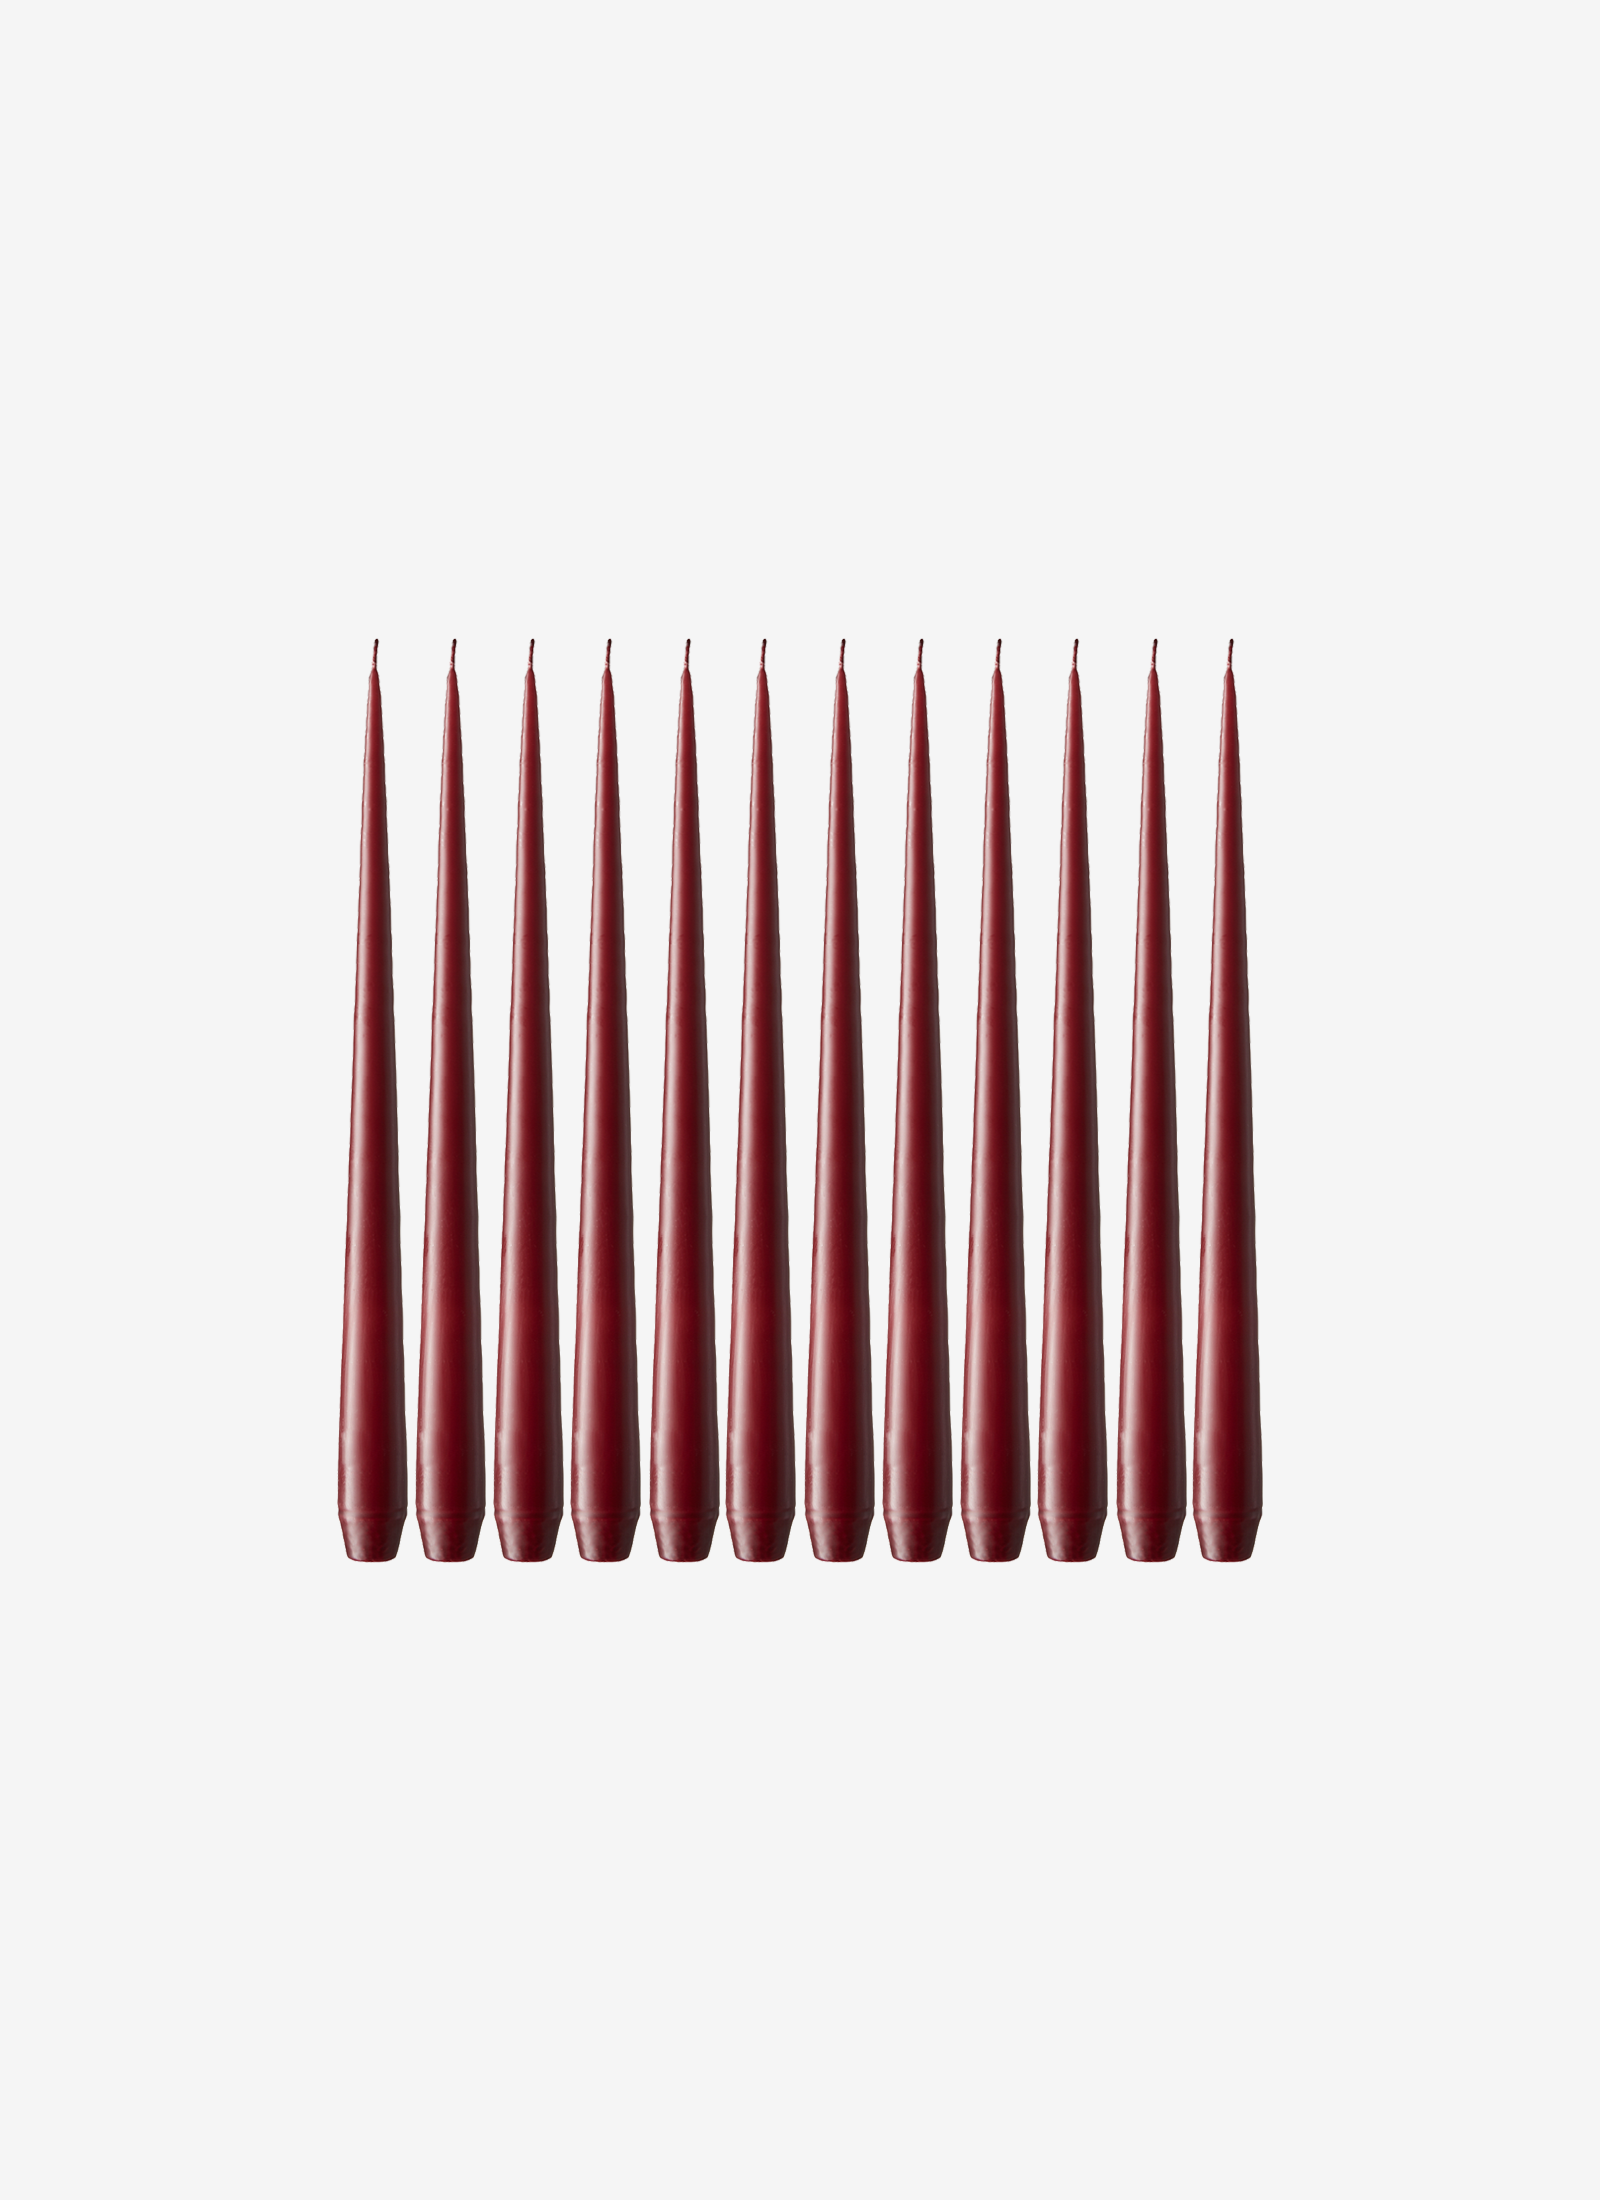 Case of 12 Tapered Candles in Wine Red #44 - 32cm